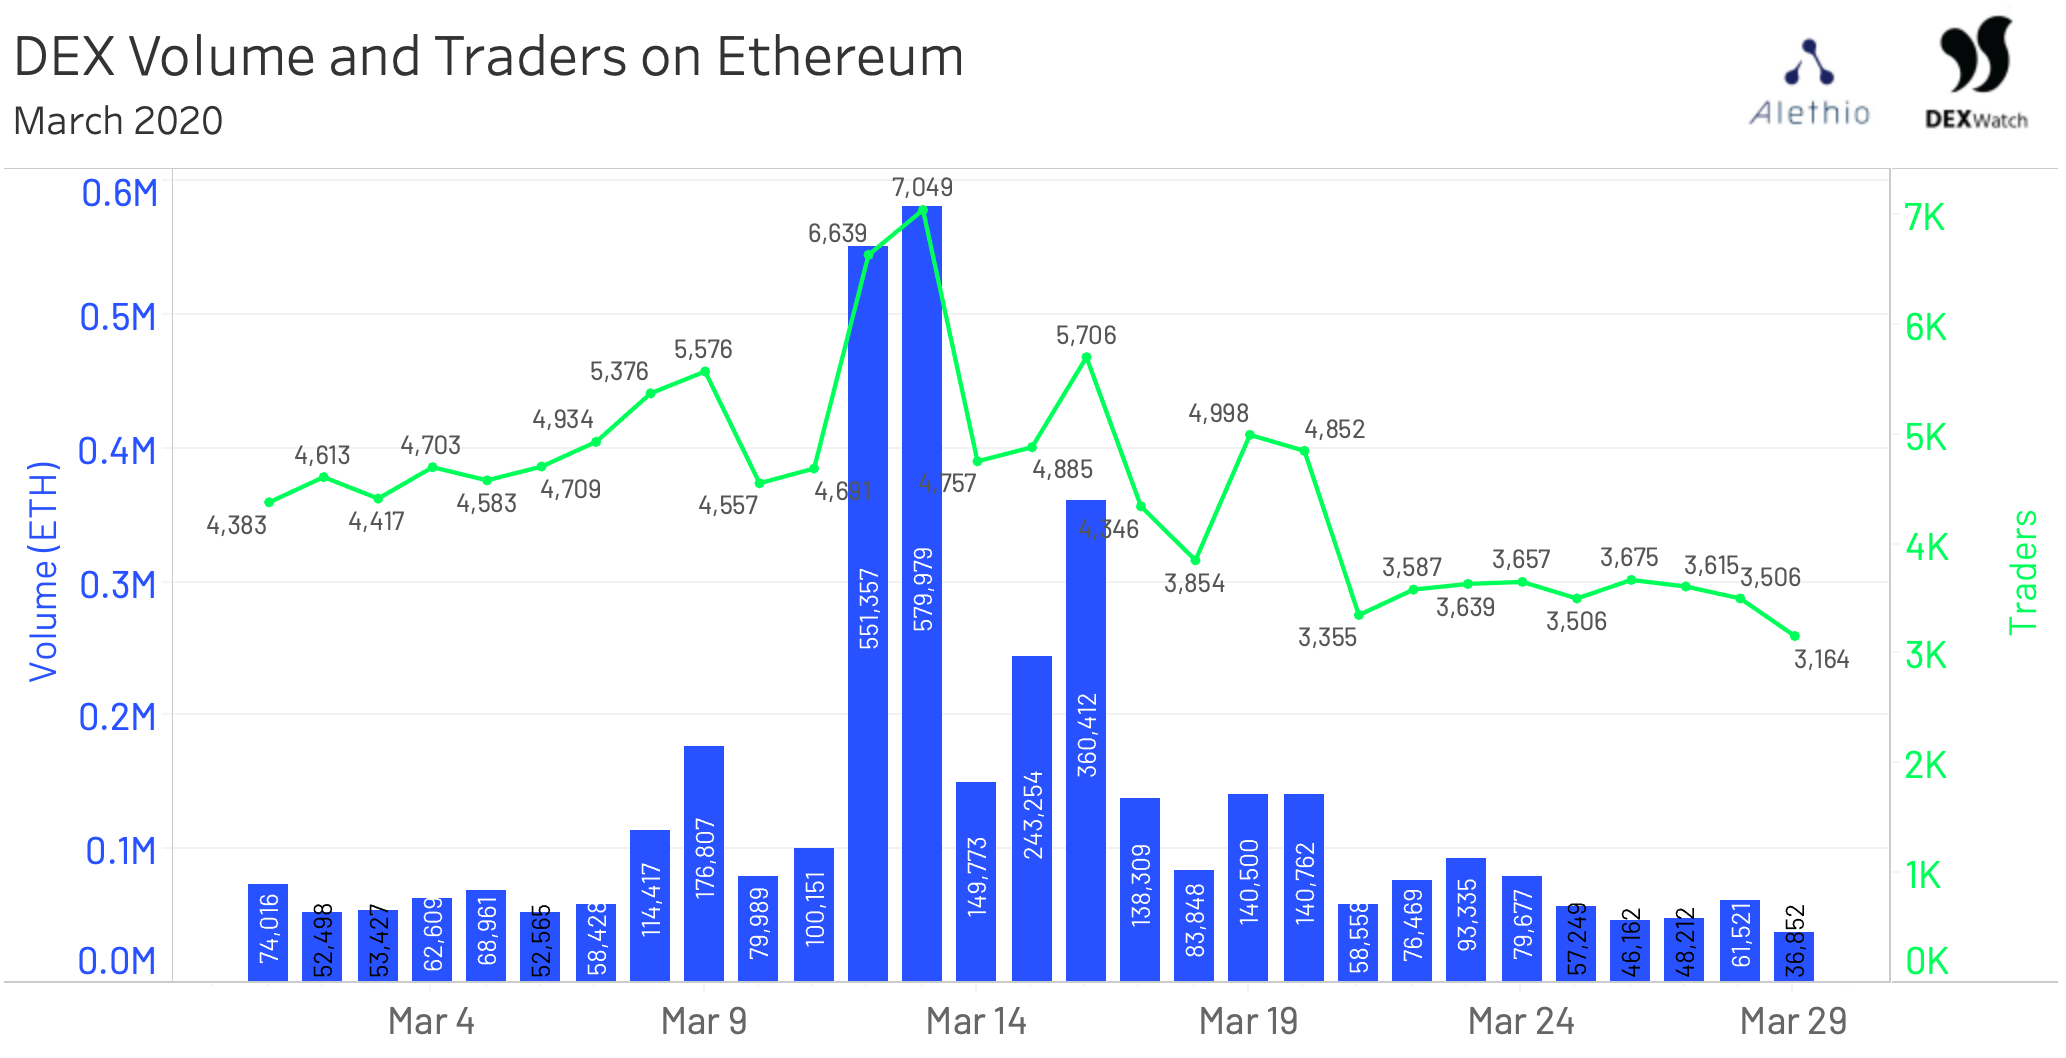 DEX Volume and Traders on Ethereum